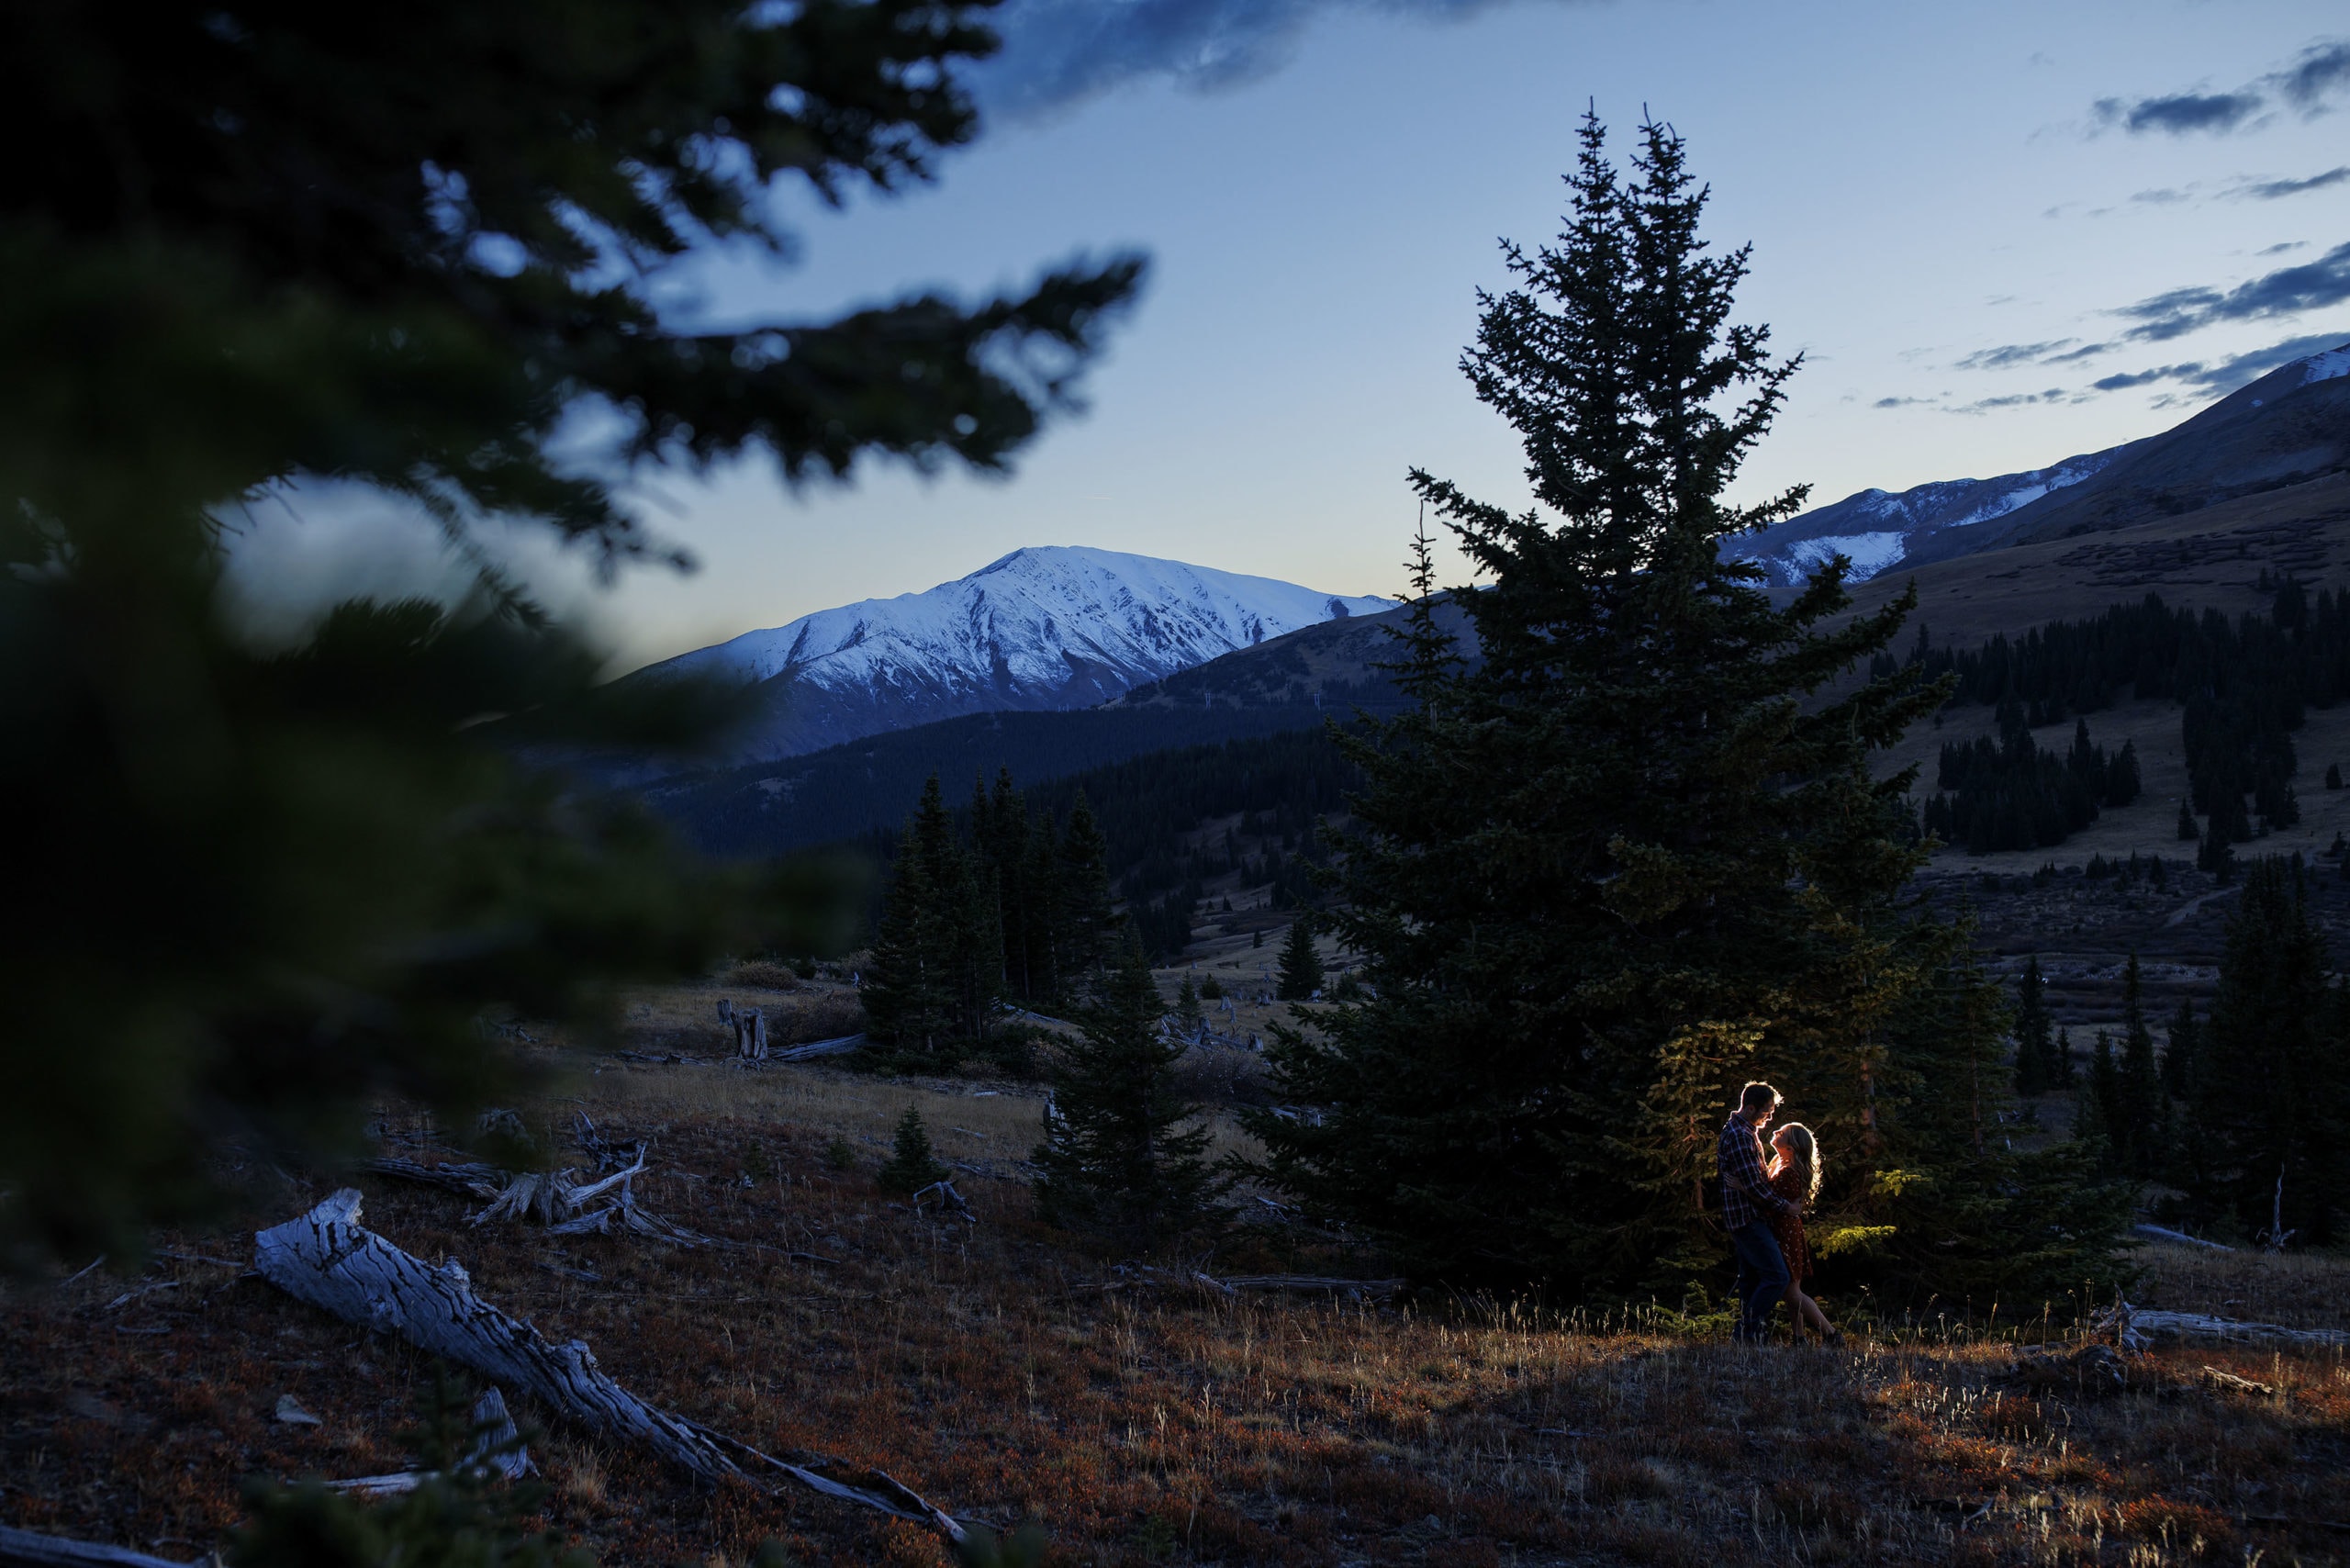 The sun sets over Mt Silverheels as a couple is illuminated against a tree on Boreas Pass during their engagement